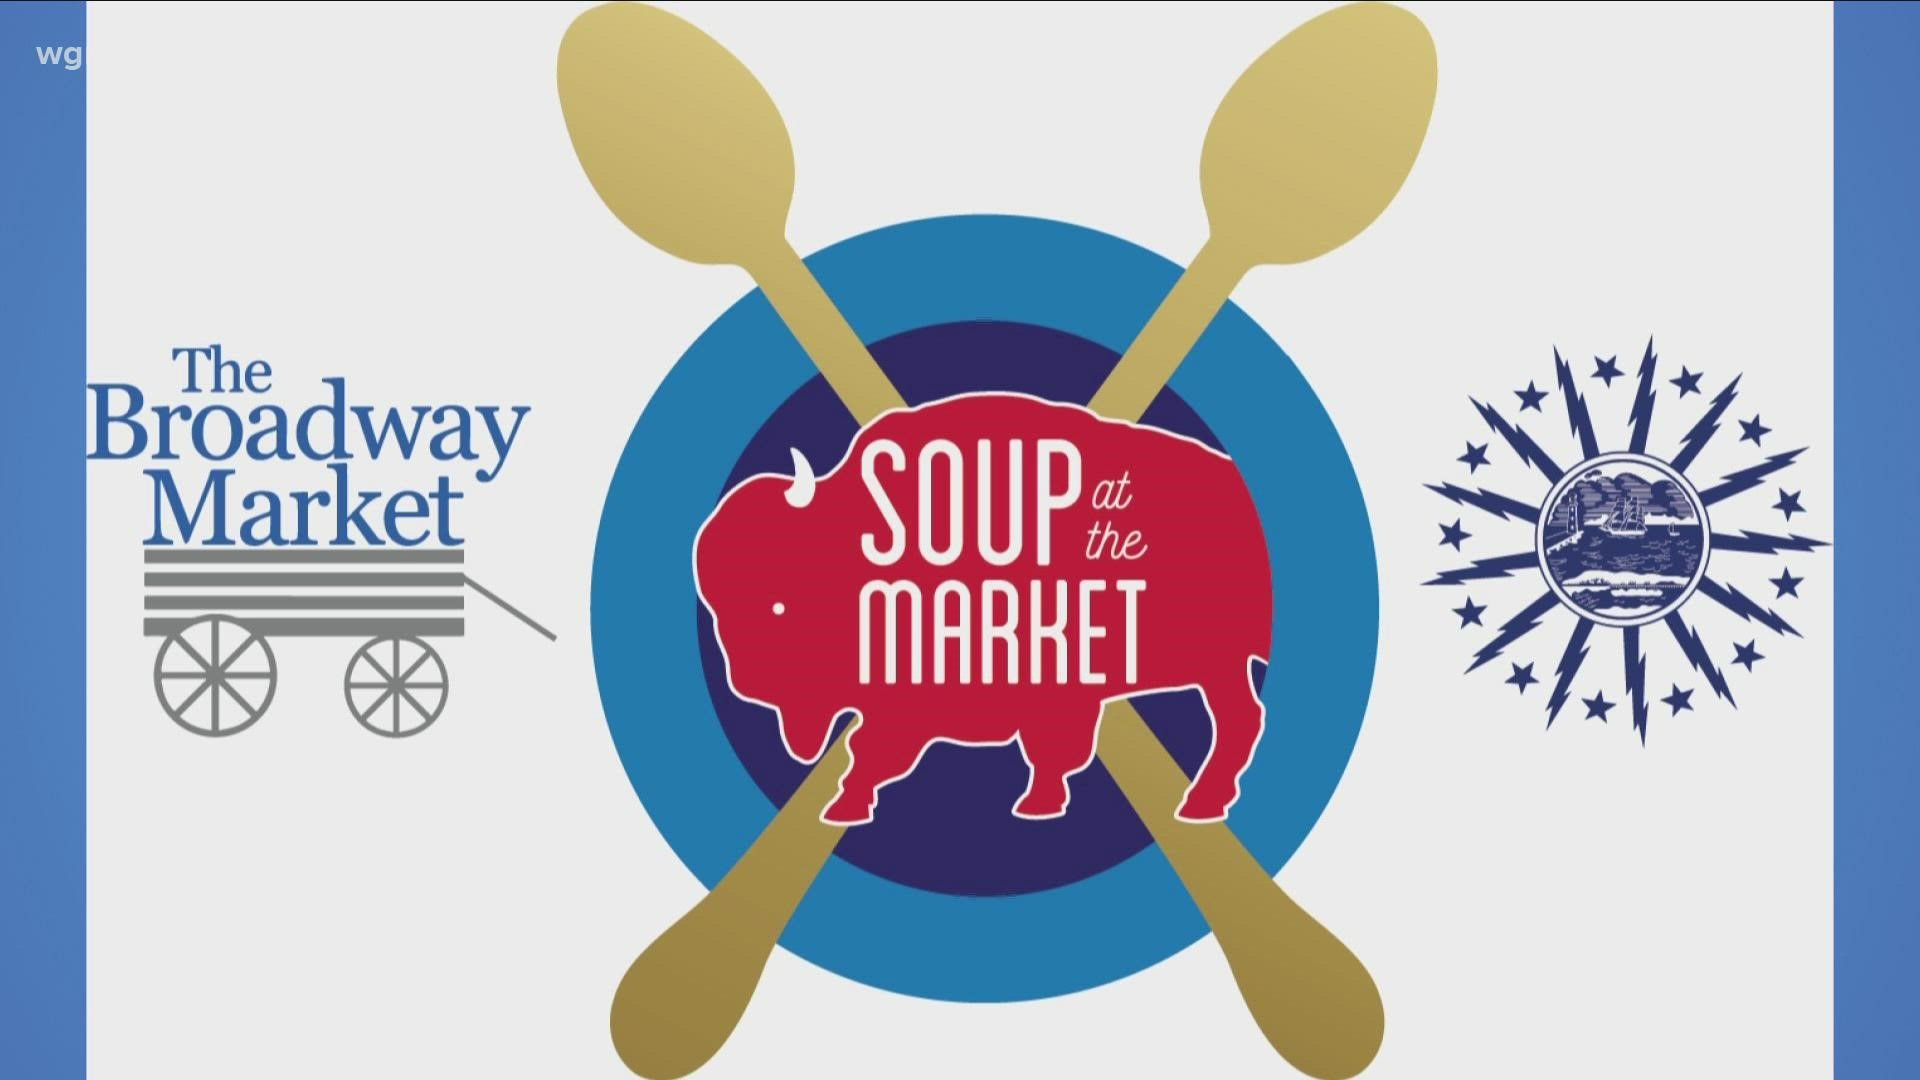 The Soup at the Market festival on March 19th